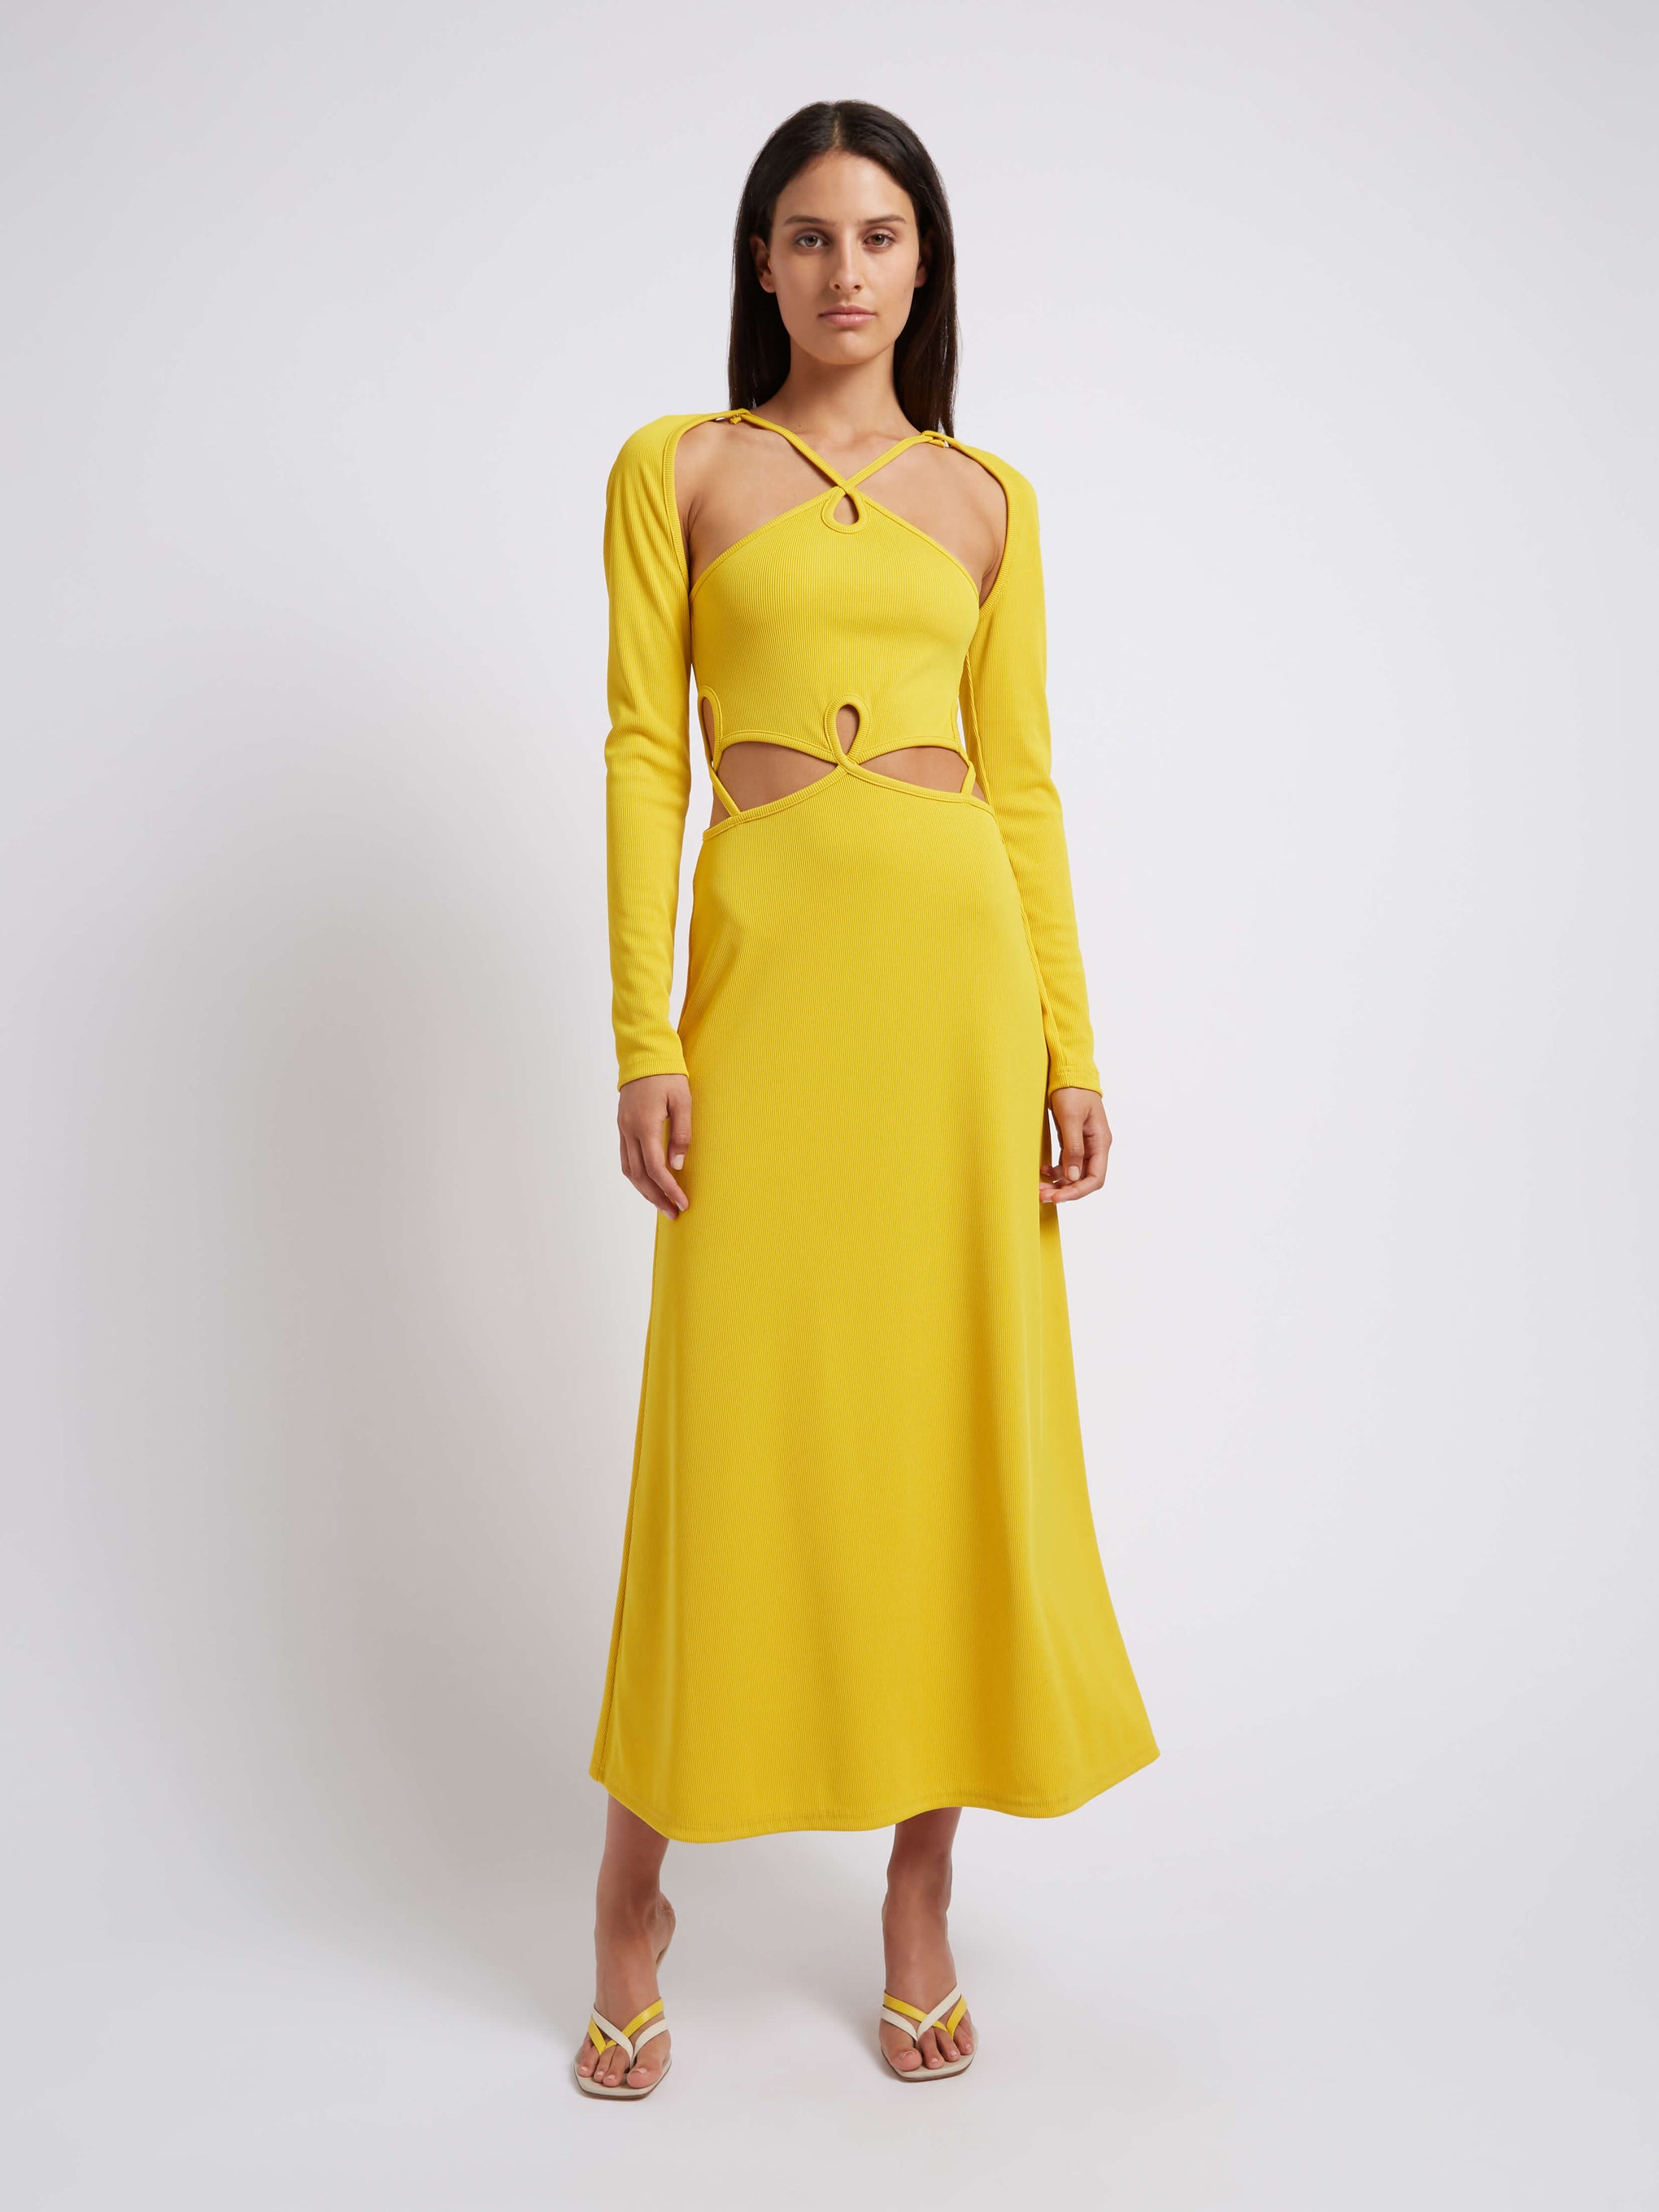 Christopher Esber Loophole Cutaway Long Sleeve Dress in Solace Yellow from The New Trend